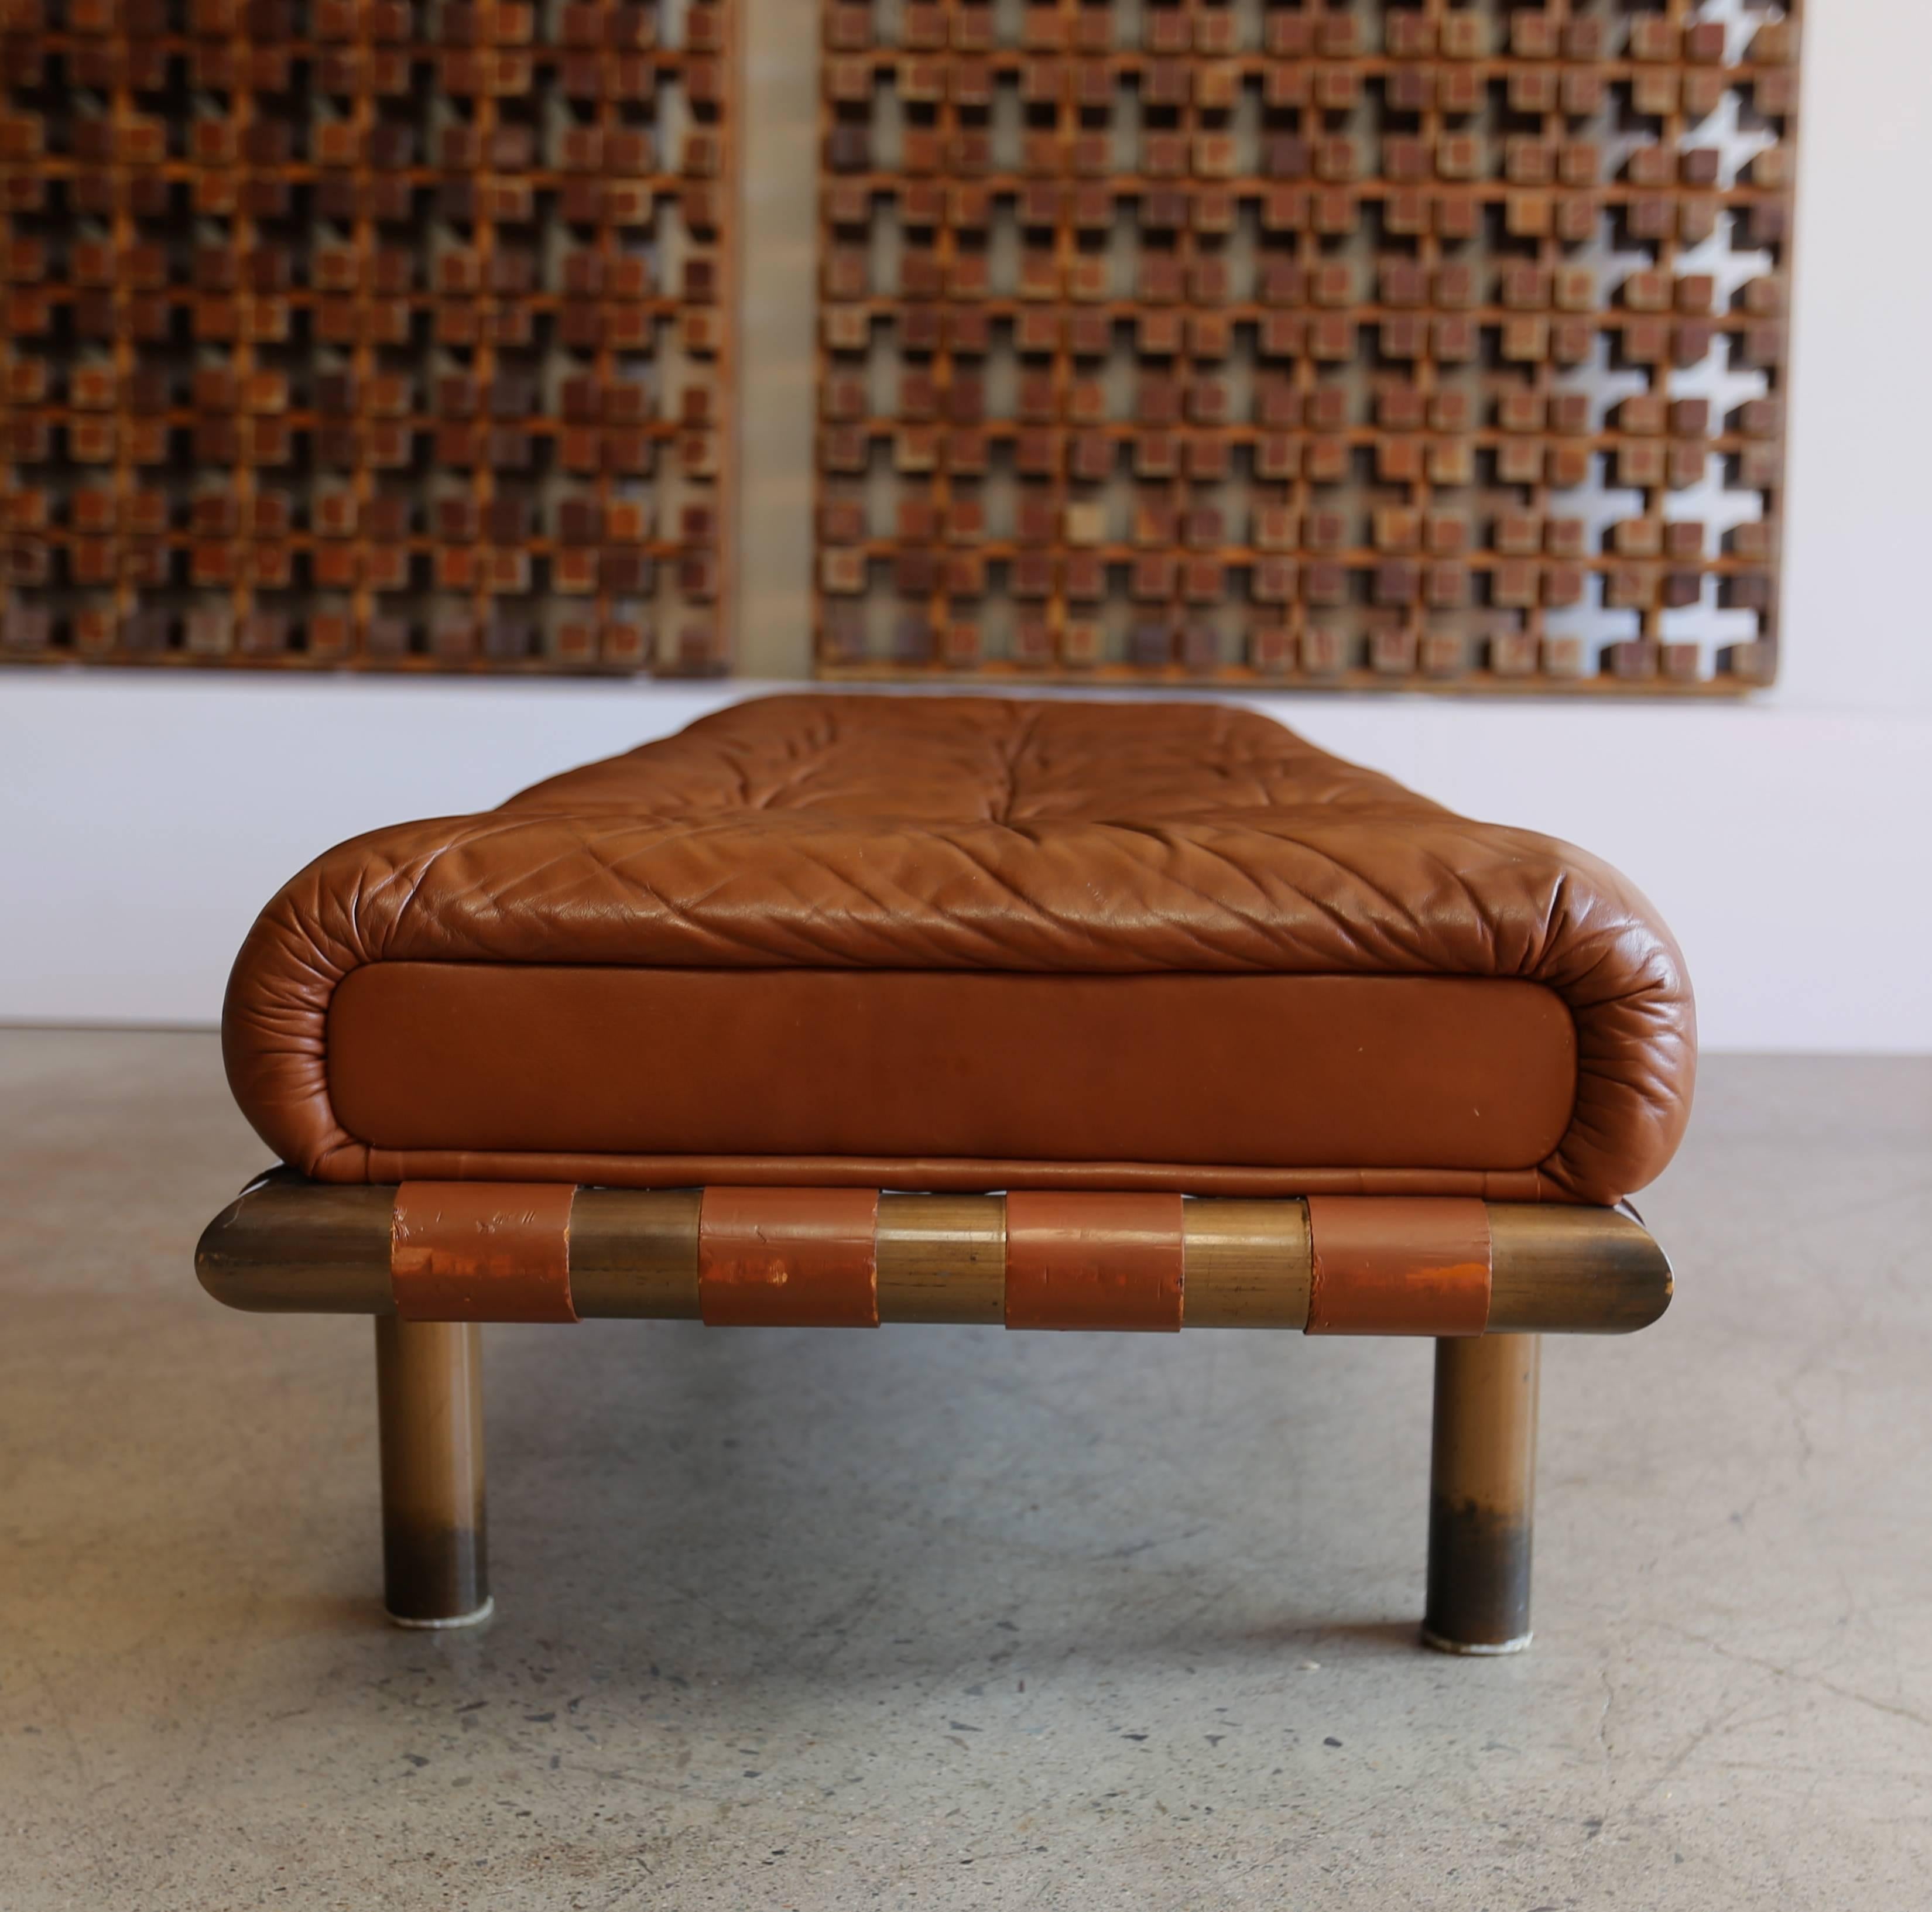 Brass and tufted leather bench.